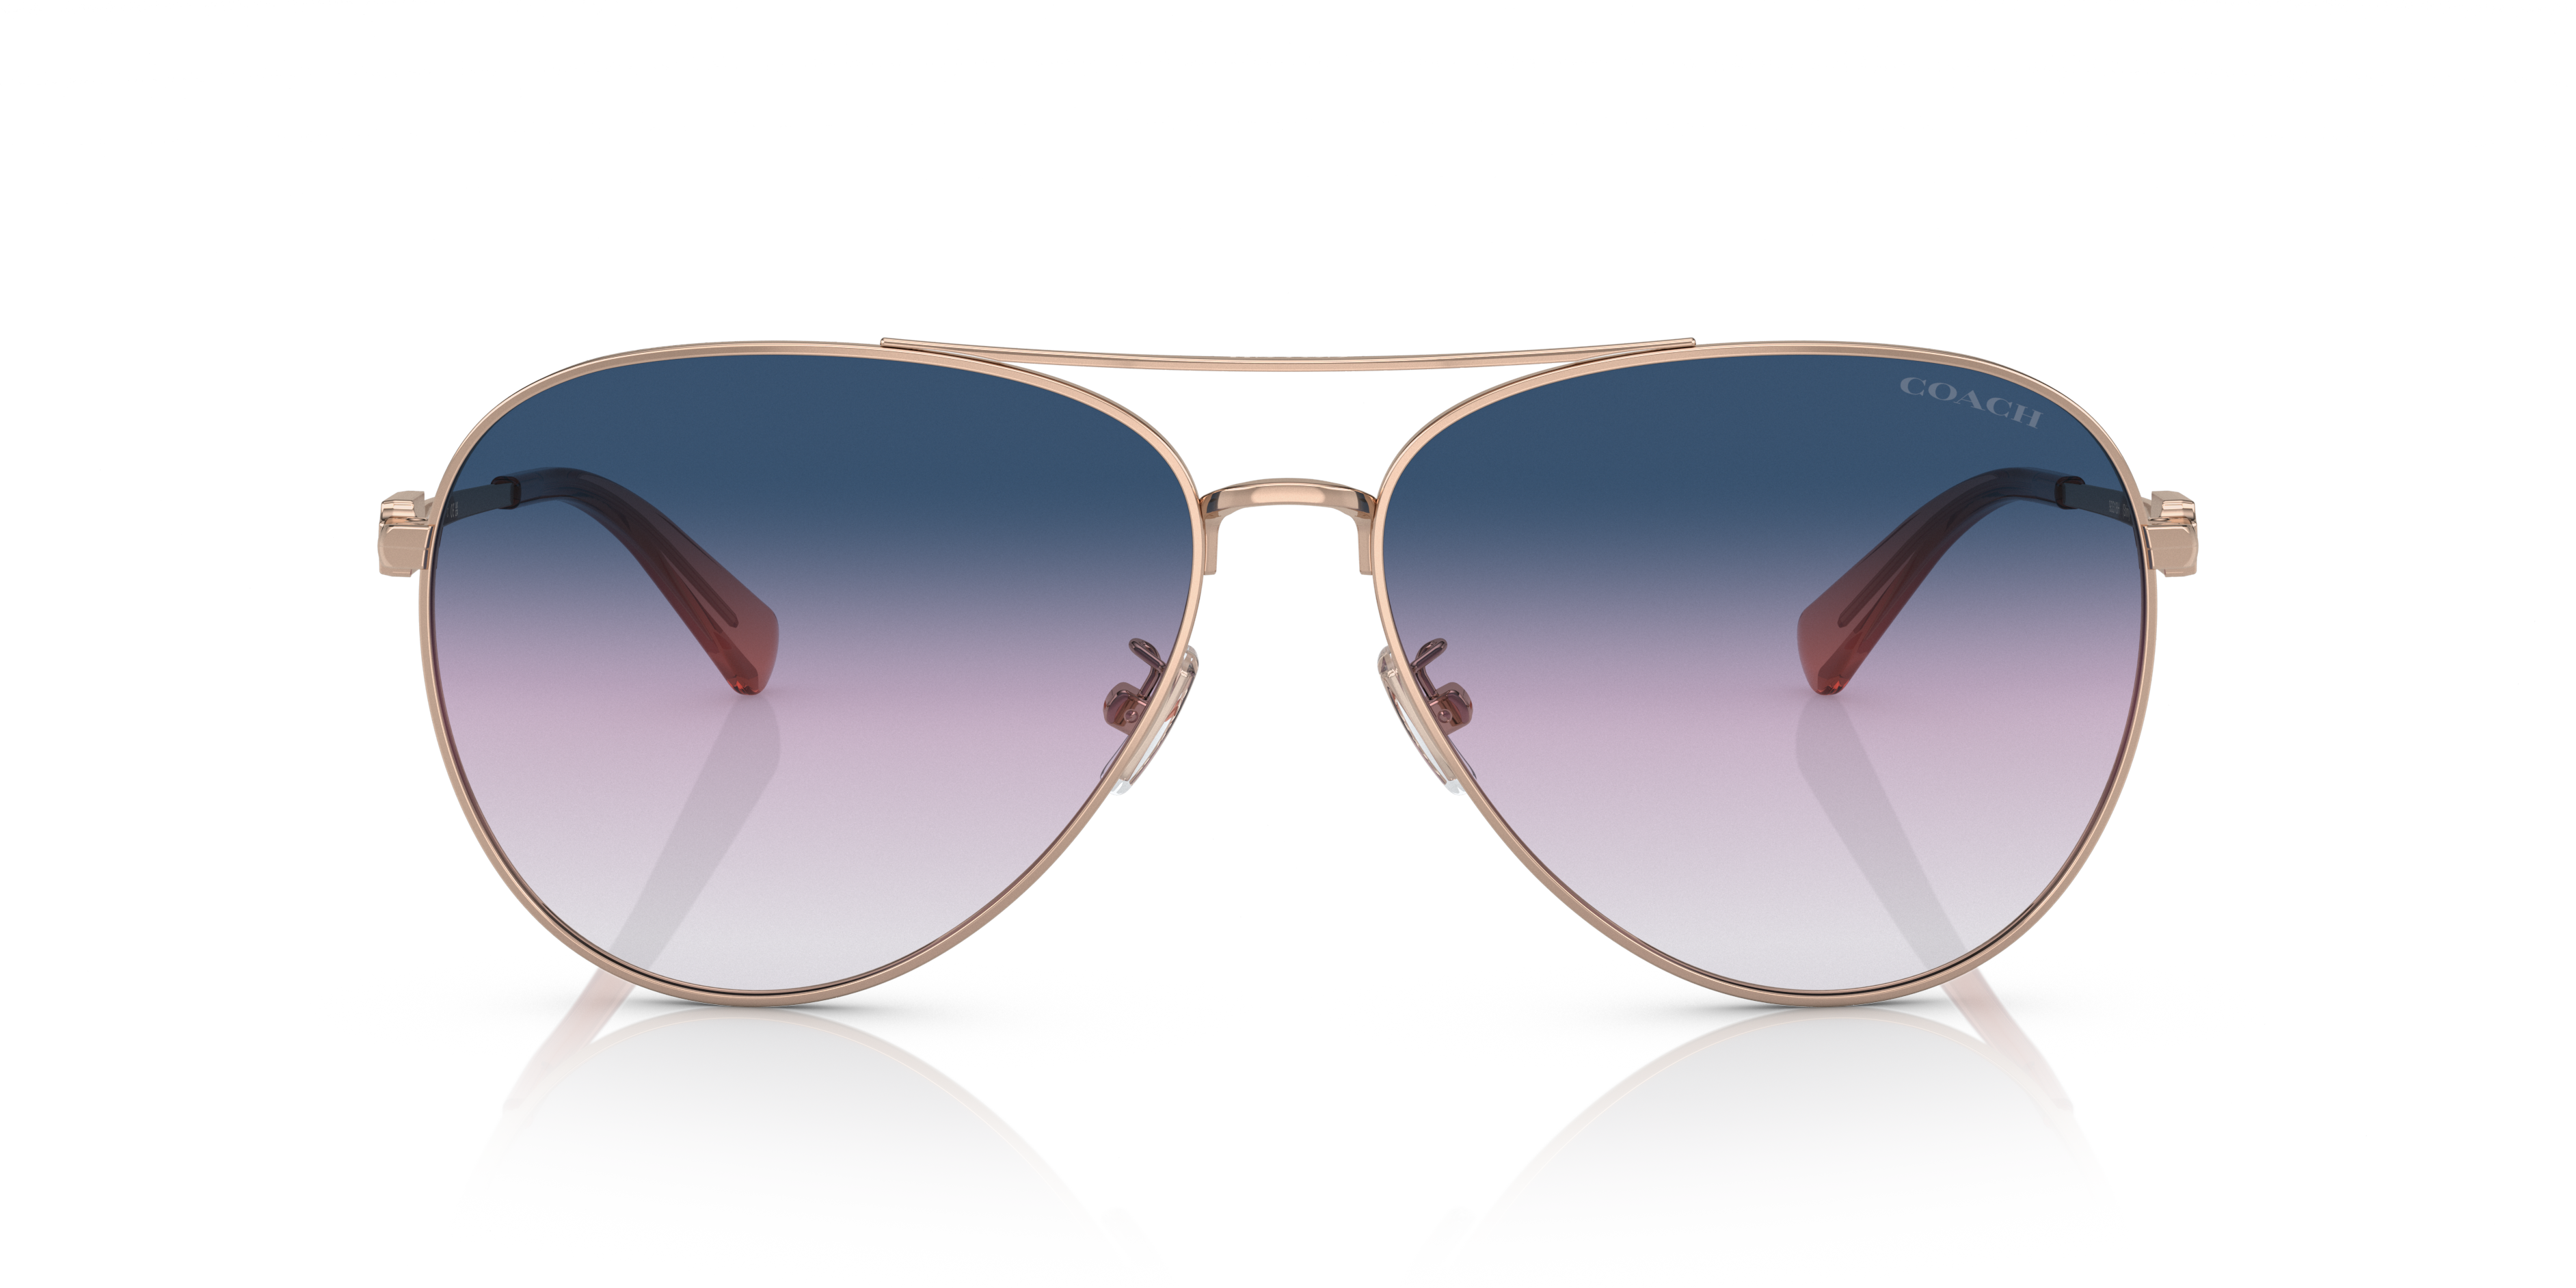 Extra large oval Gucci style sunglasses with white armor and purple  gradient lenses | Online Agency to Buy and Send Food, Meat, Packages, Gift